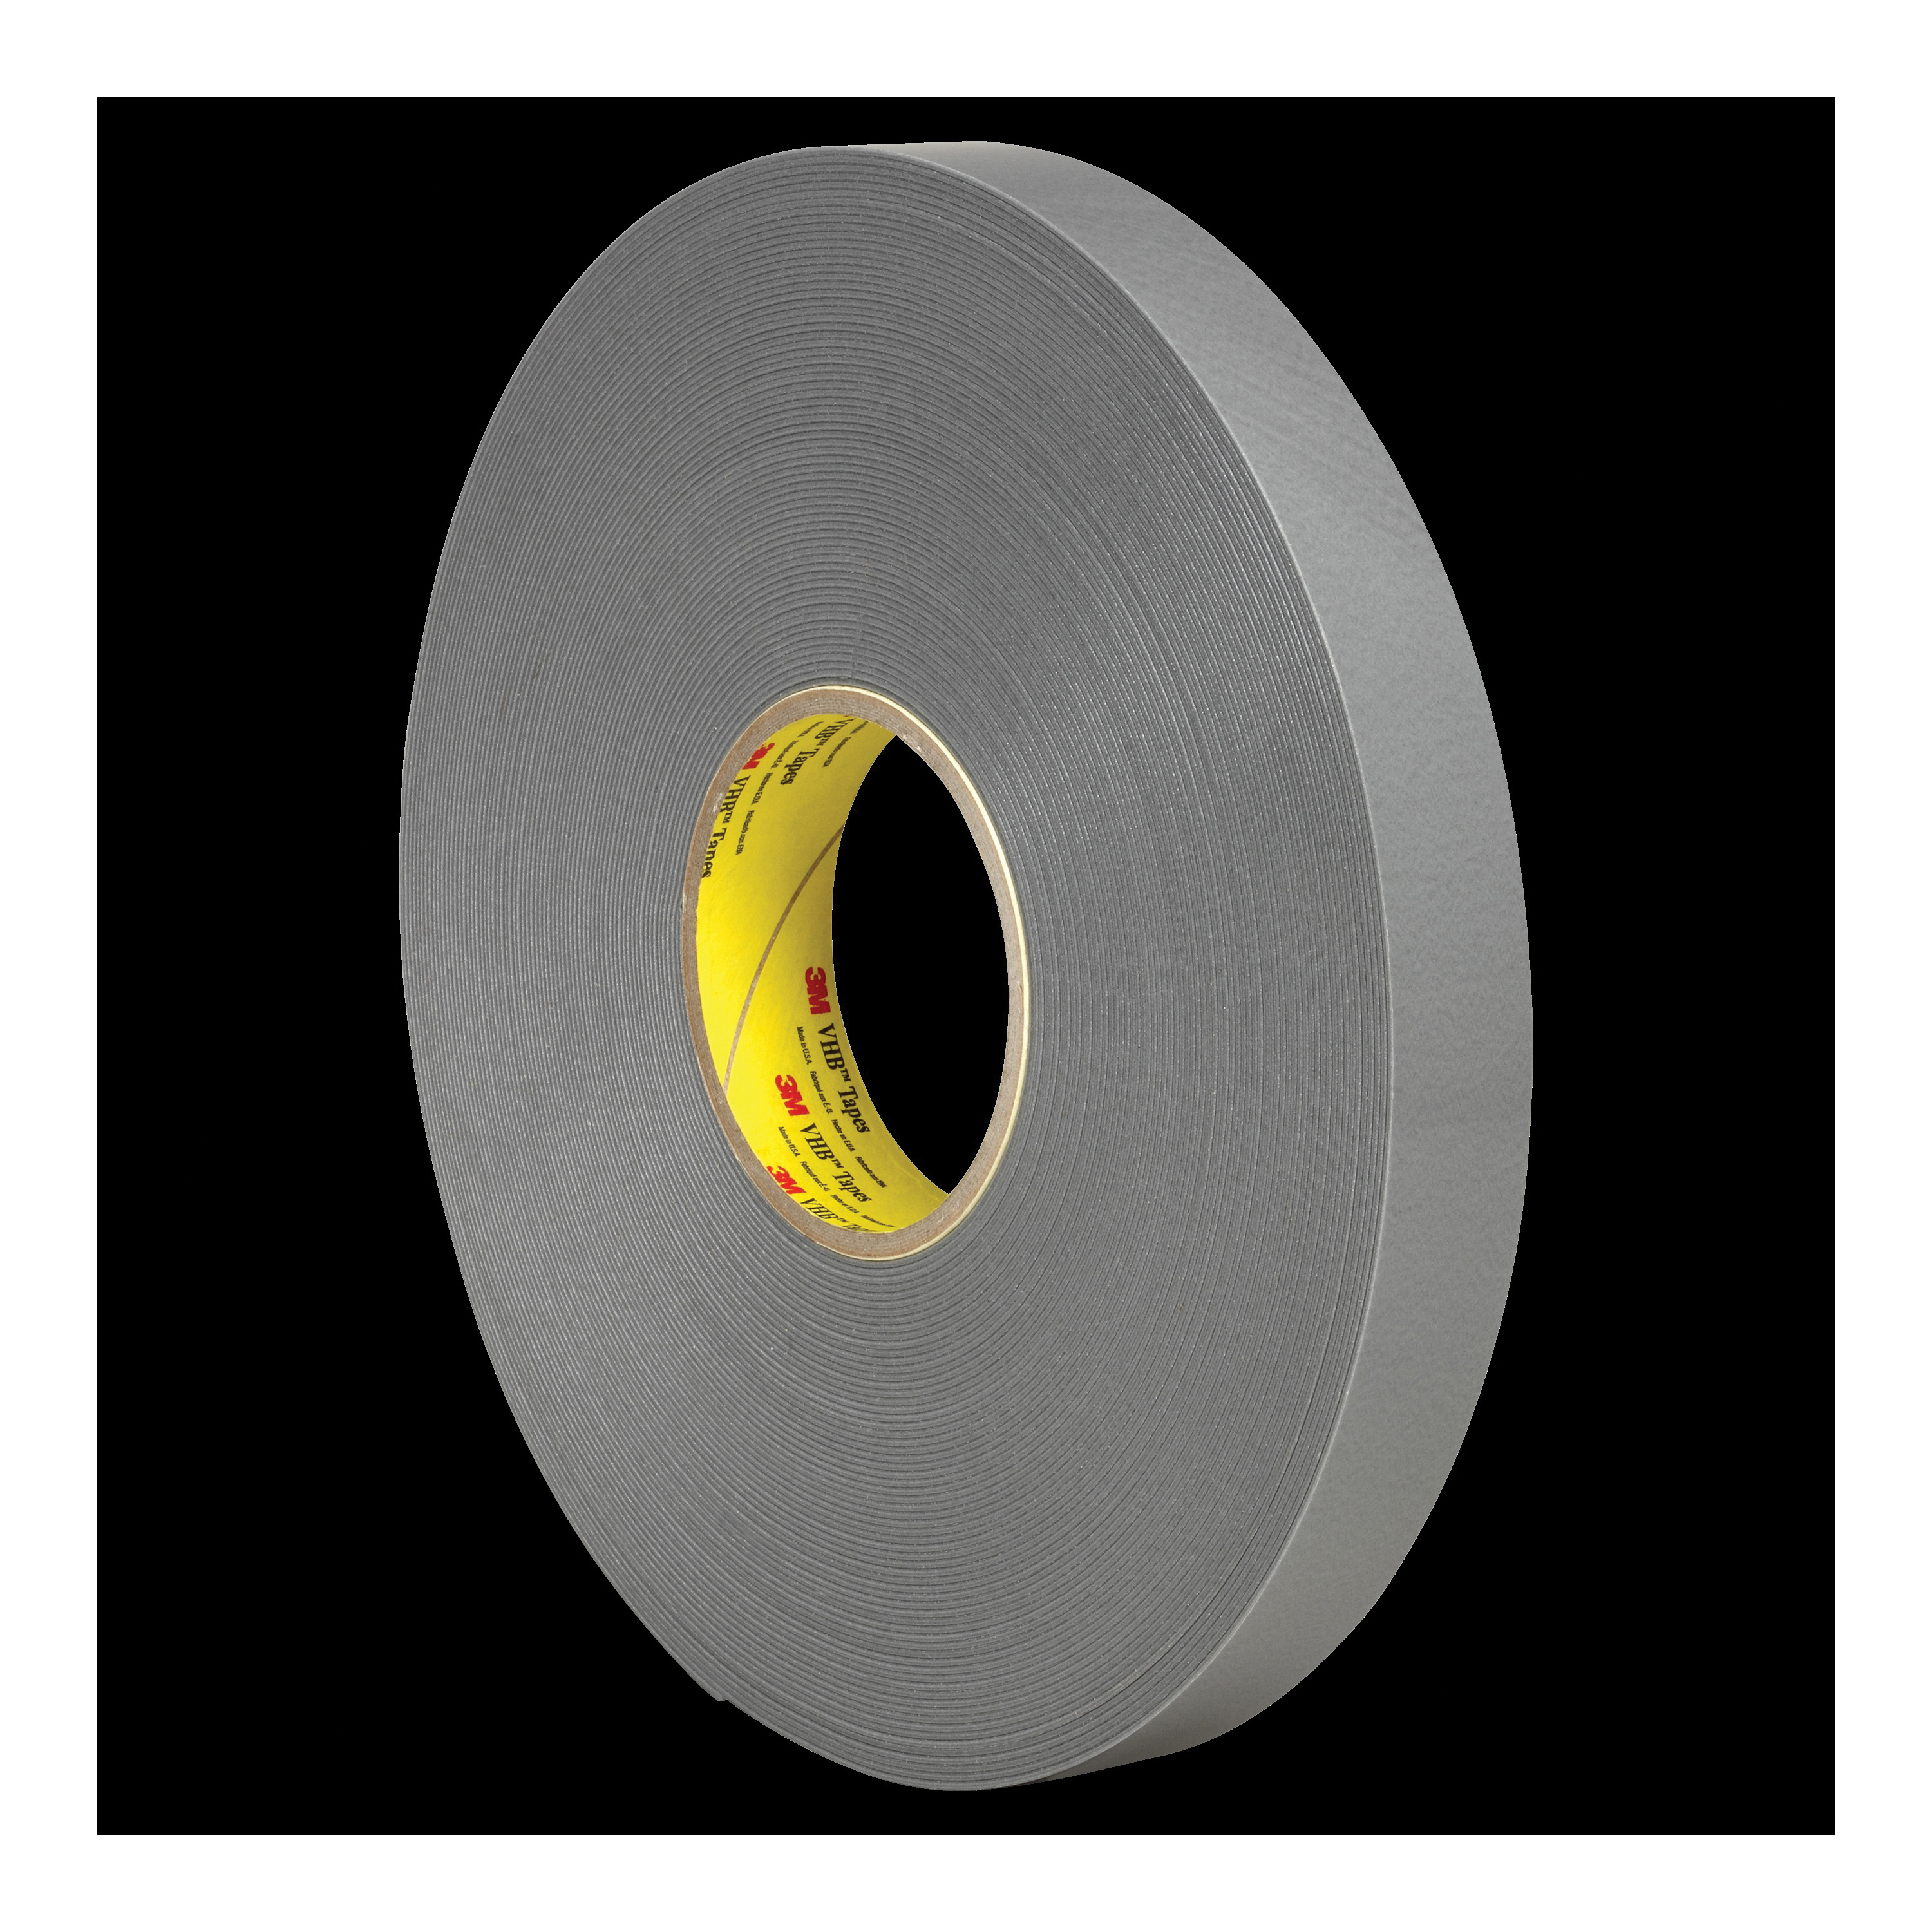 3M™ VHB™ 021200-23247 Pressure Sensitive Double Sided Bonding Tape, 36 yd L x 1/2 in W, 0.045 in THK, Low Temperature Acrylic Adhesive, Acrylic Foam Backing, Gray